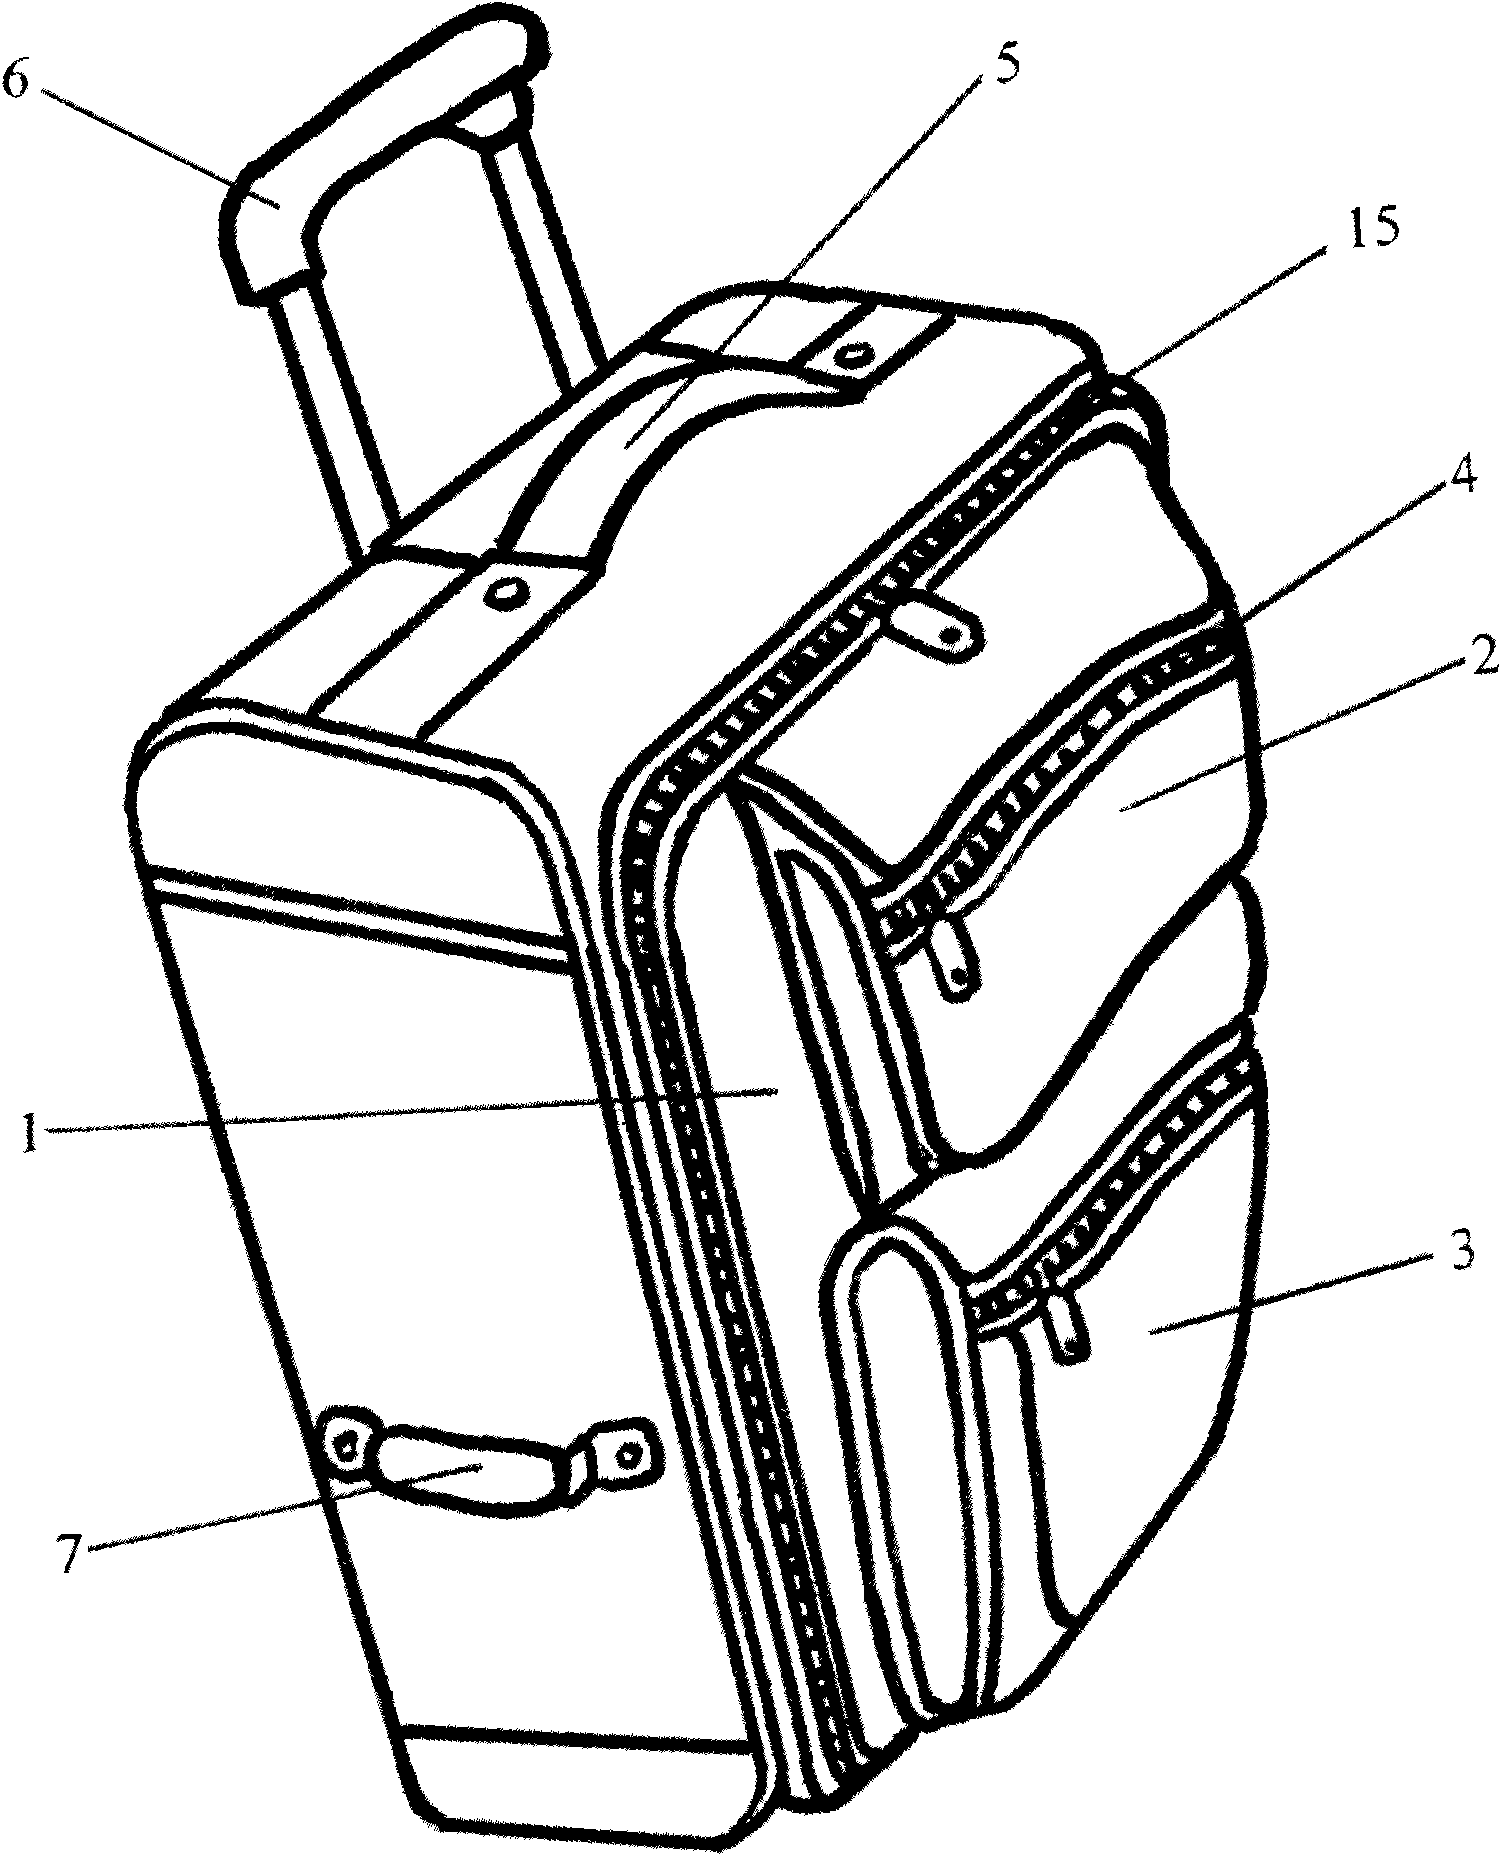 Draw-bar box with pockets and transverse side carrying handle